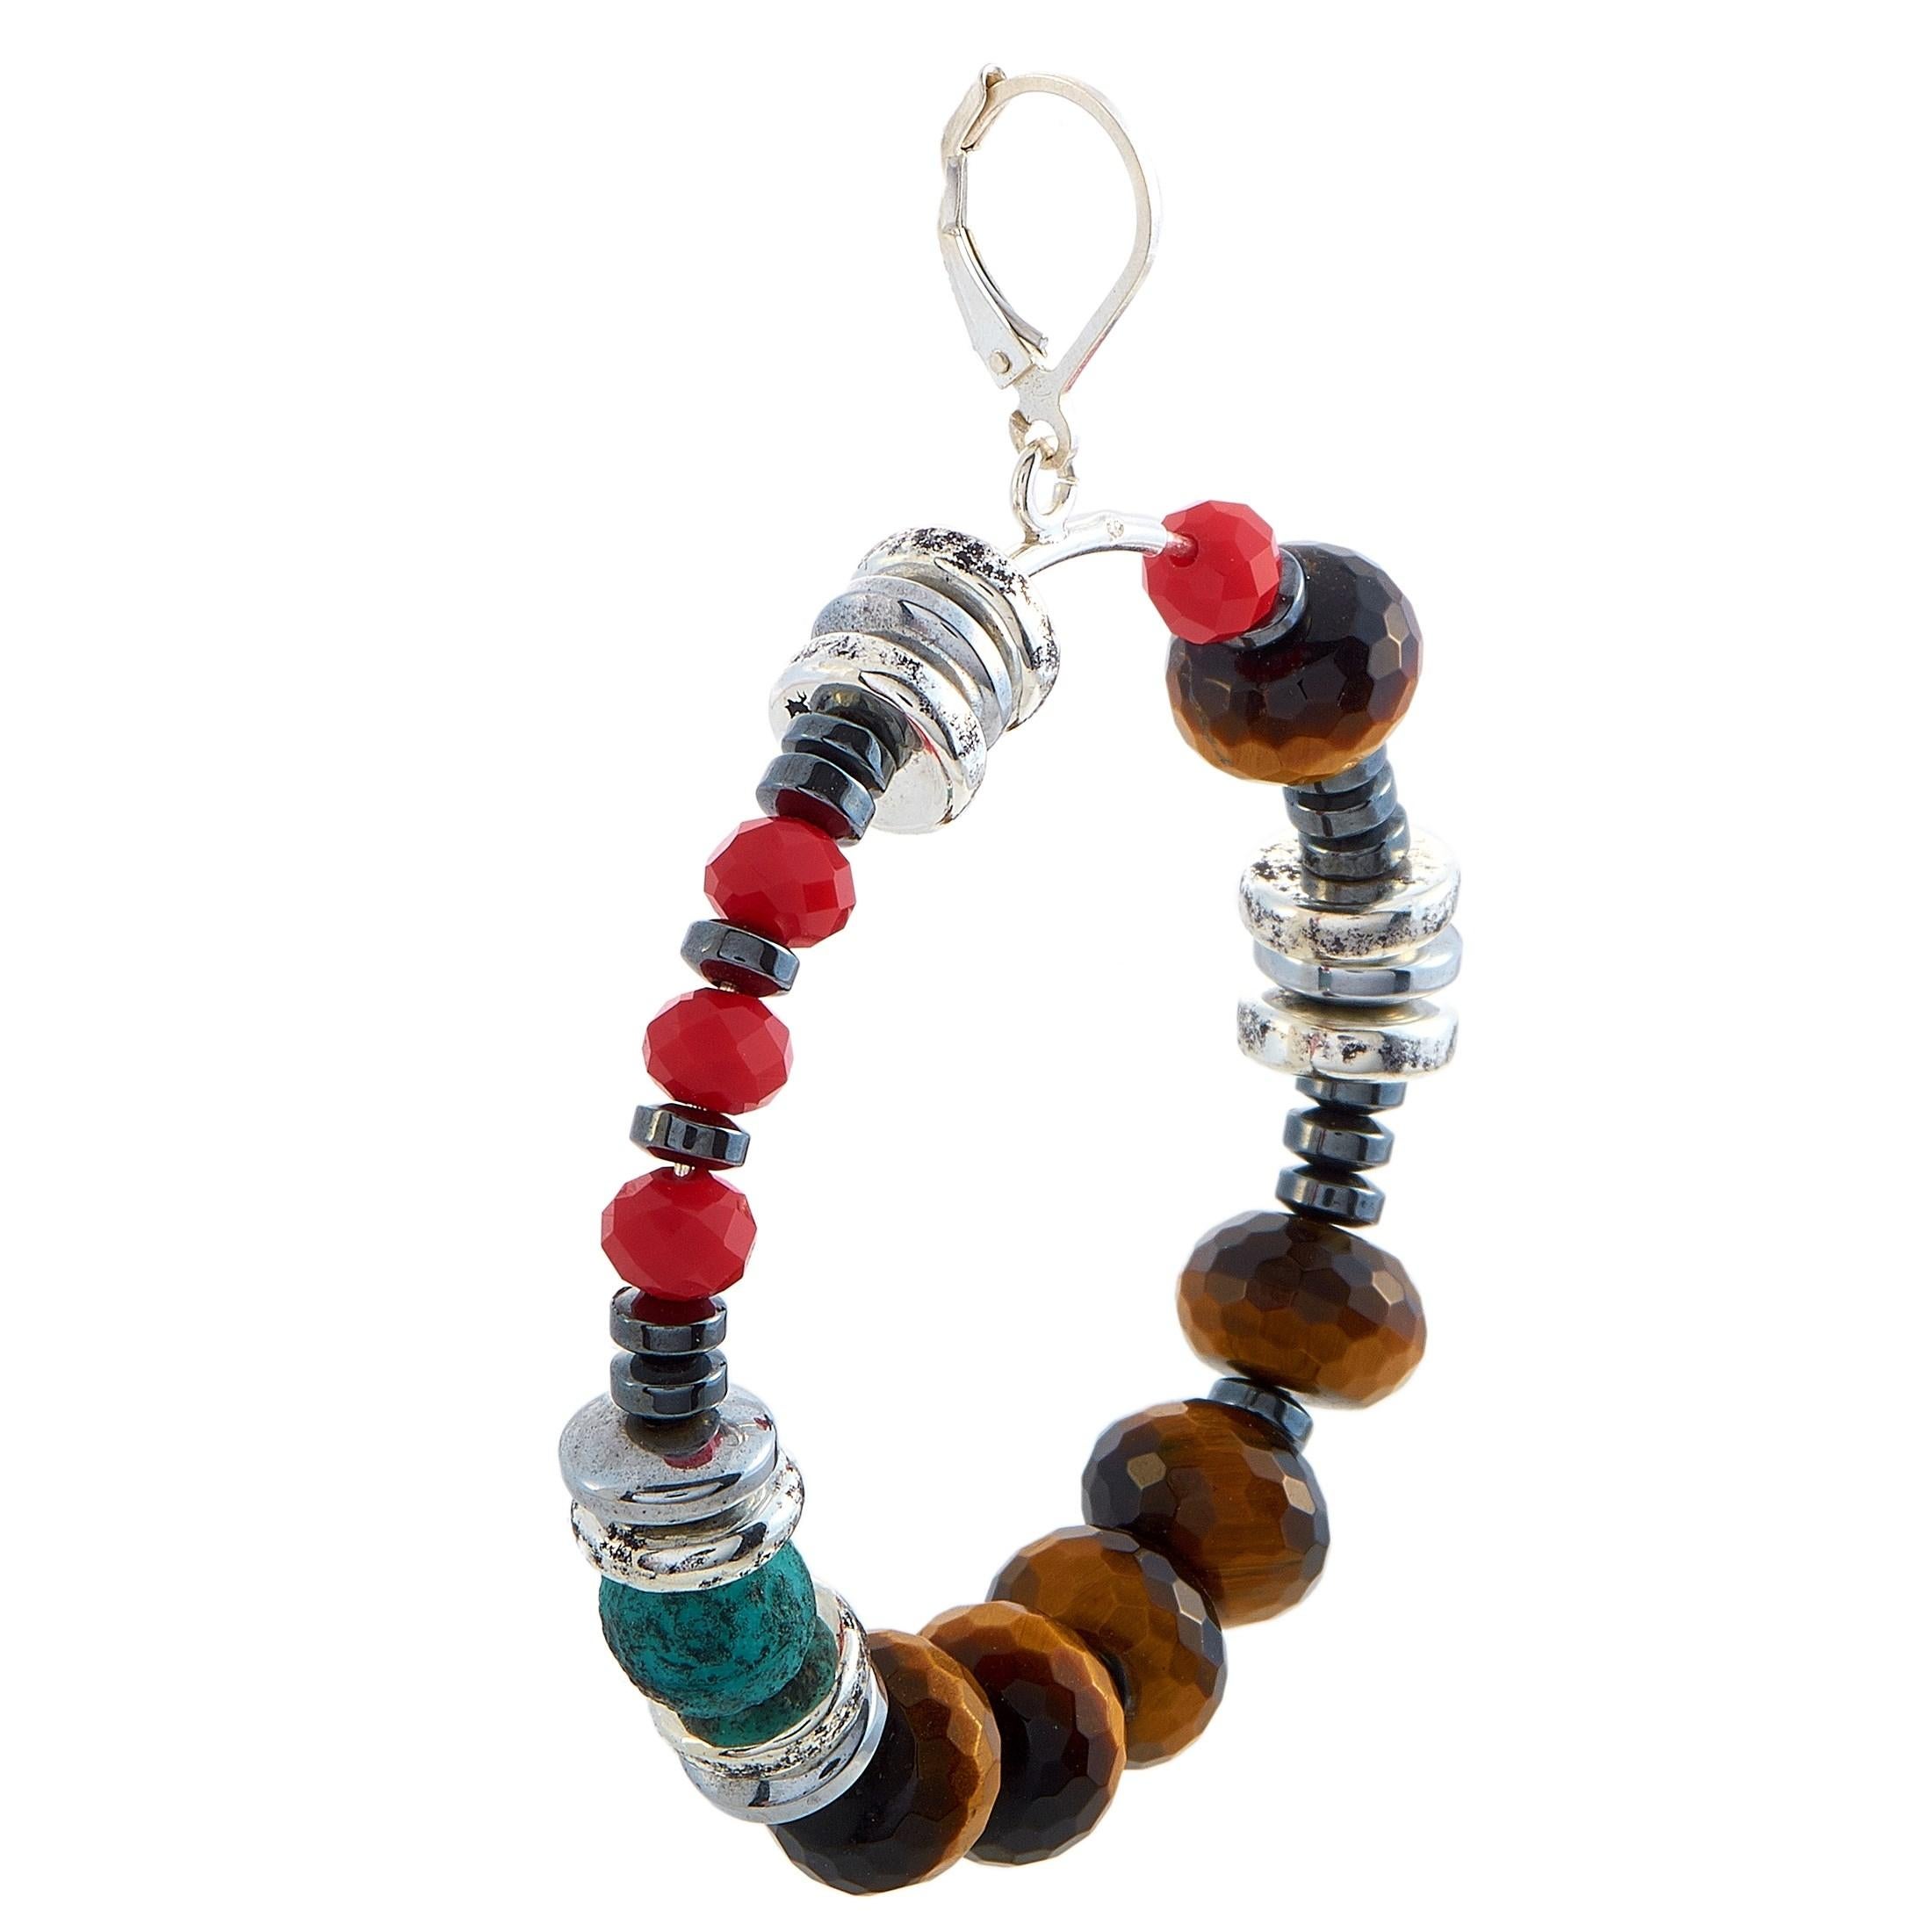 These King Baby earrings are made of silver and embellished with ceramic, hematite, and Czech glass beads. The earrings measure 2.50” in length and 0.37” in width and each of the two weighs 15 grams.

The pair is offered in brand-new condition and